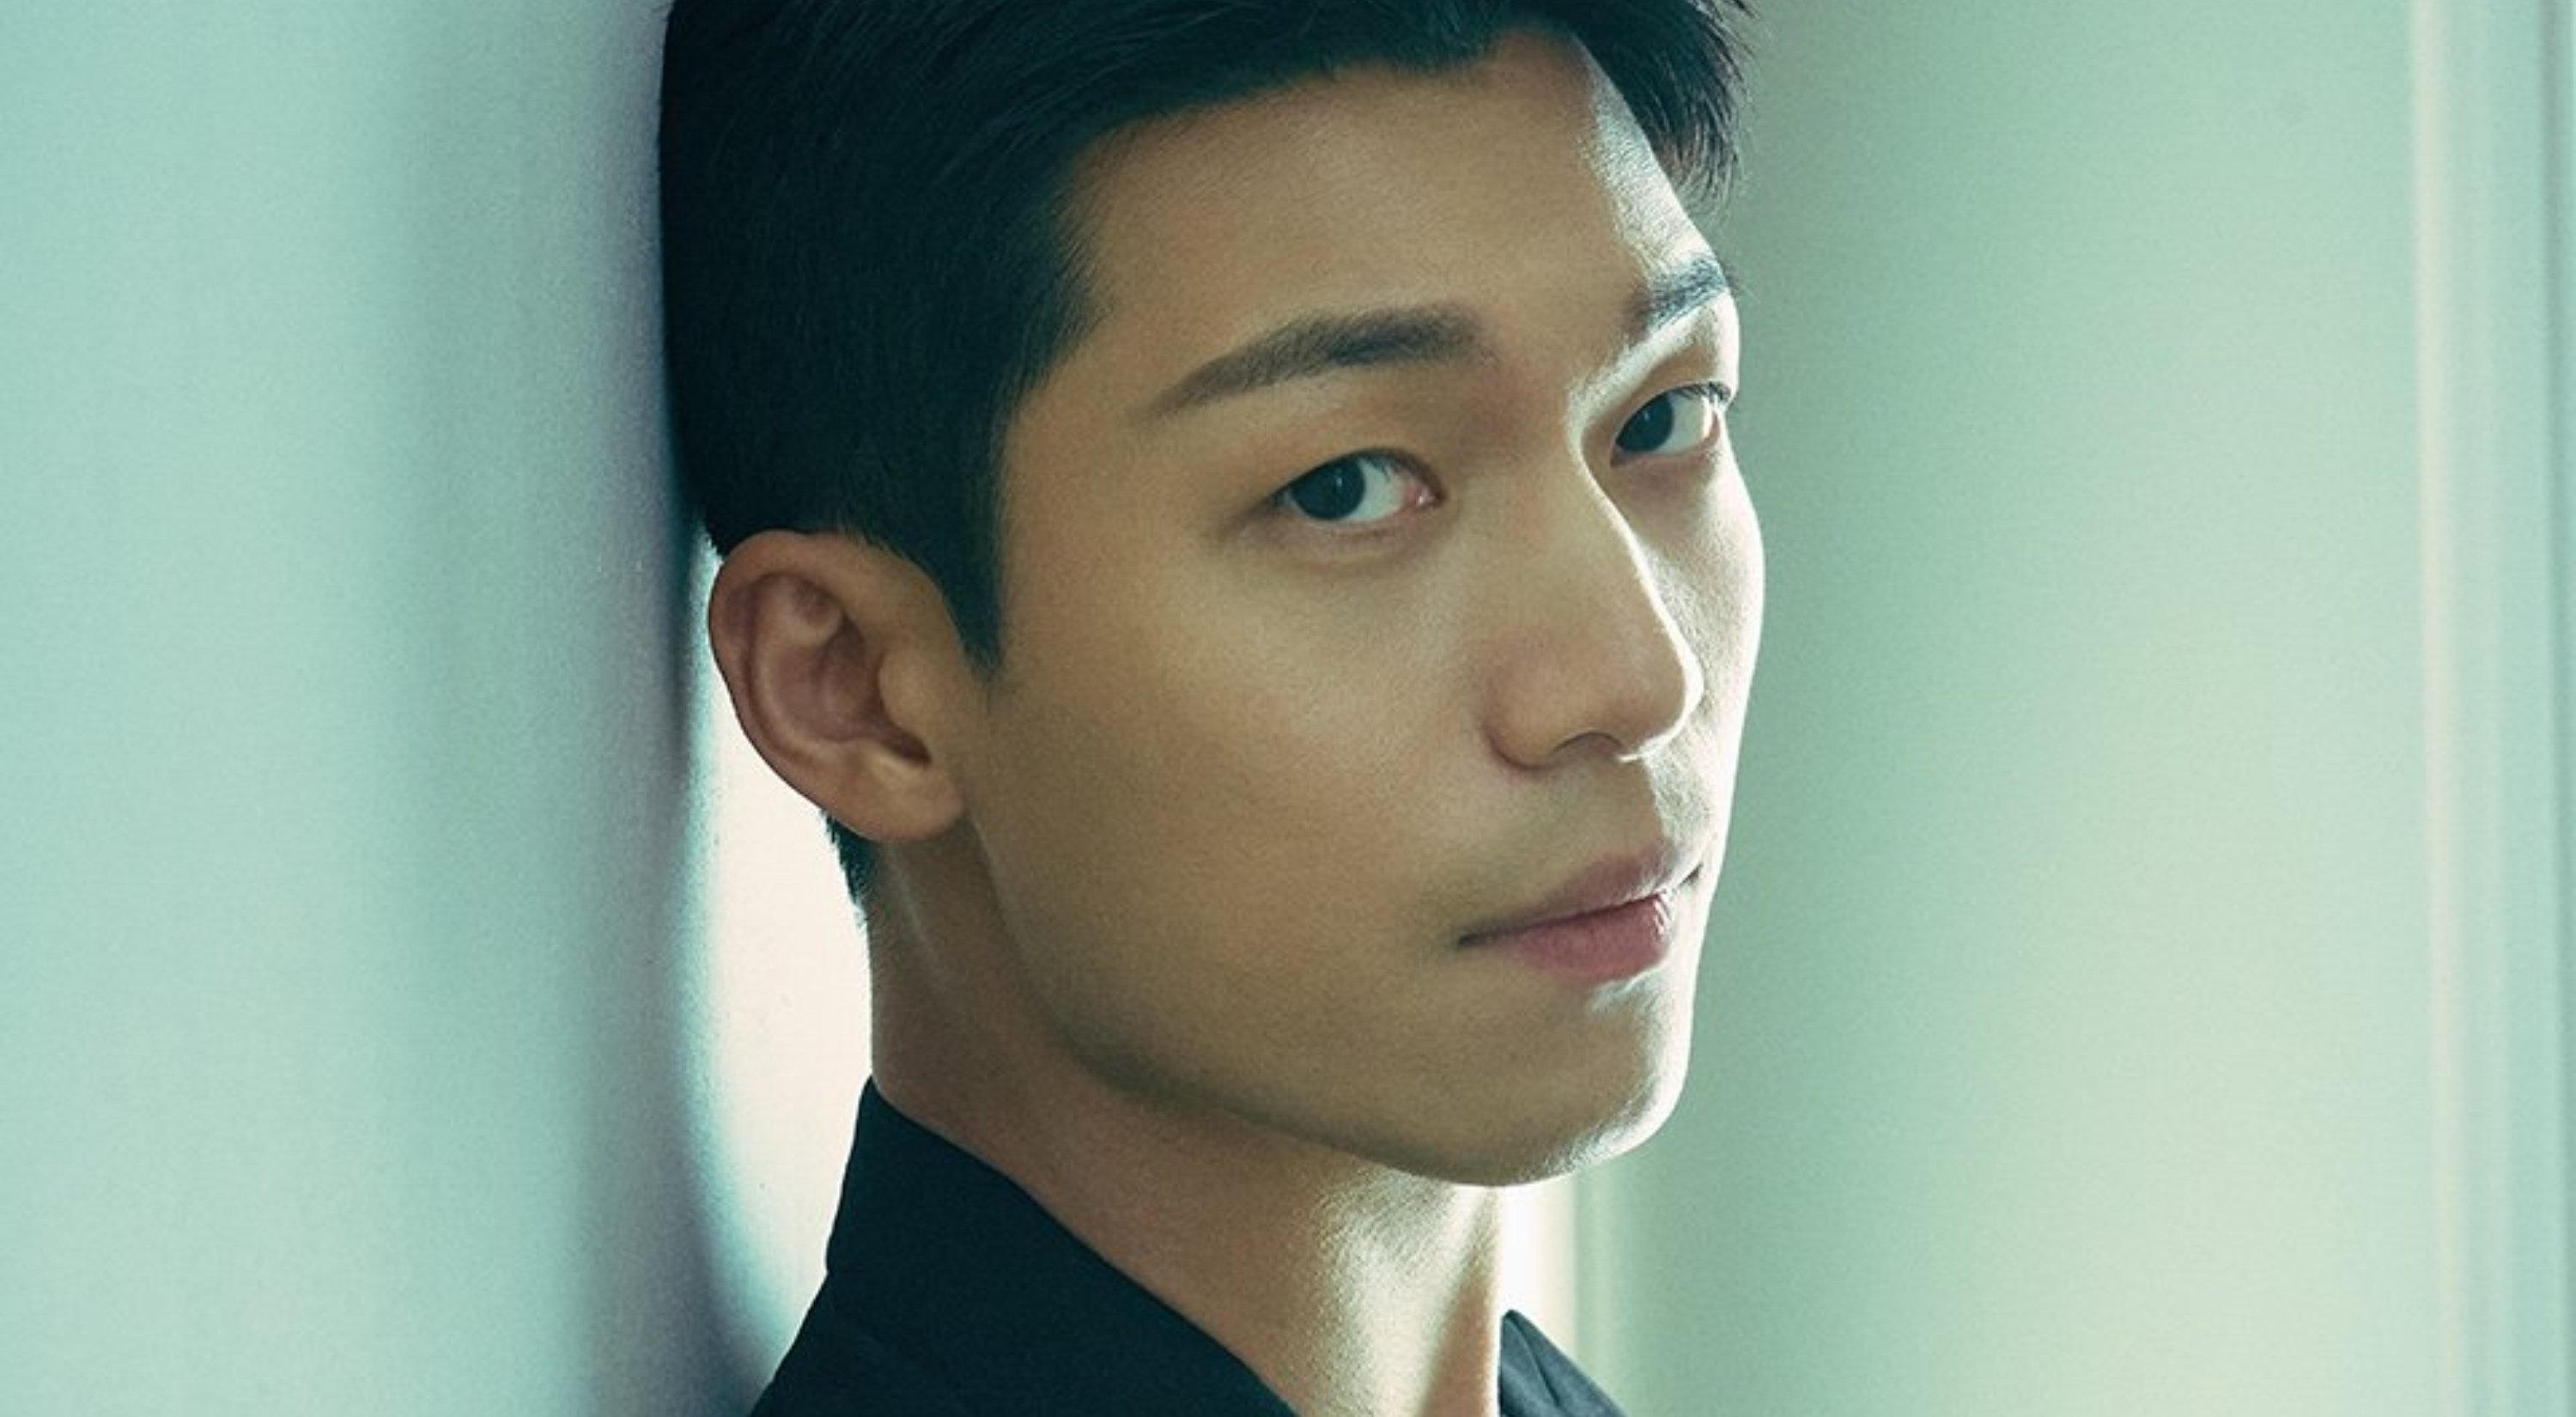 Actor Wi Ha-Joon as Hwang Jun-Ho for 'Squid Game' on Netflix wearing full black suit for photoshoot